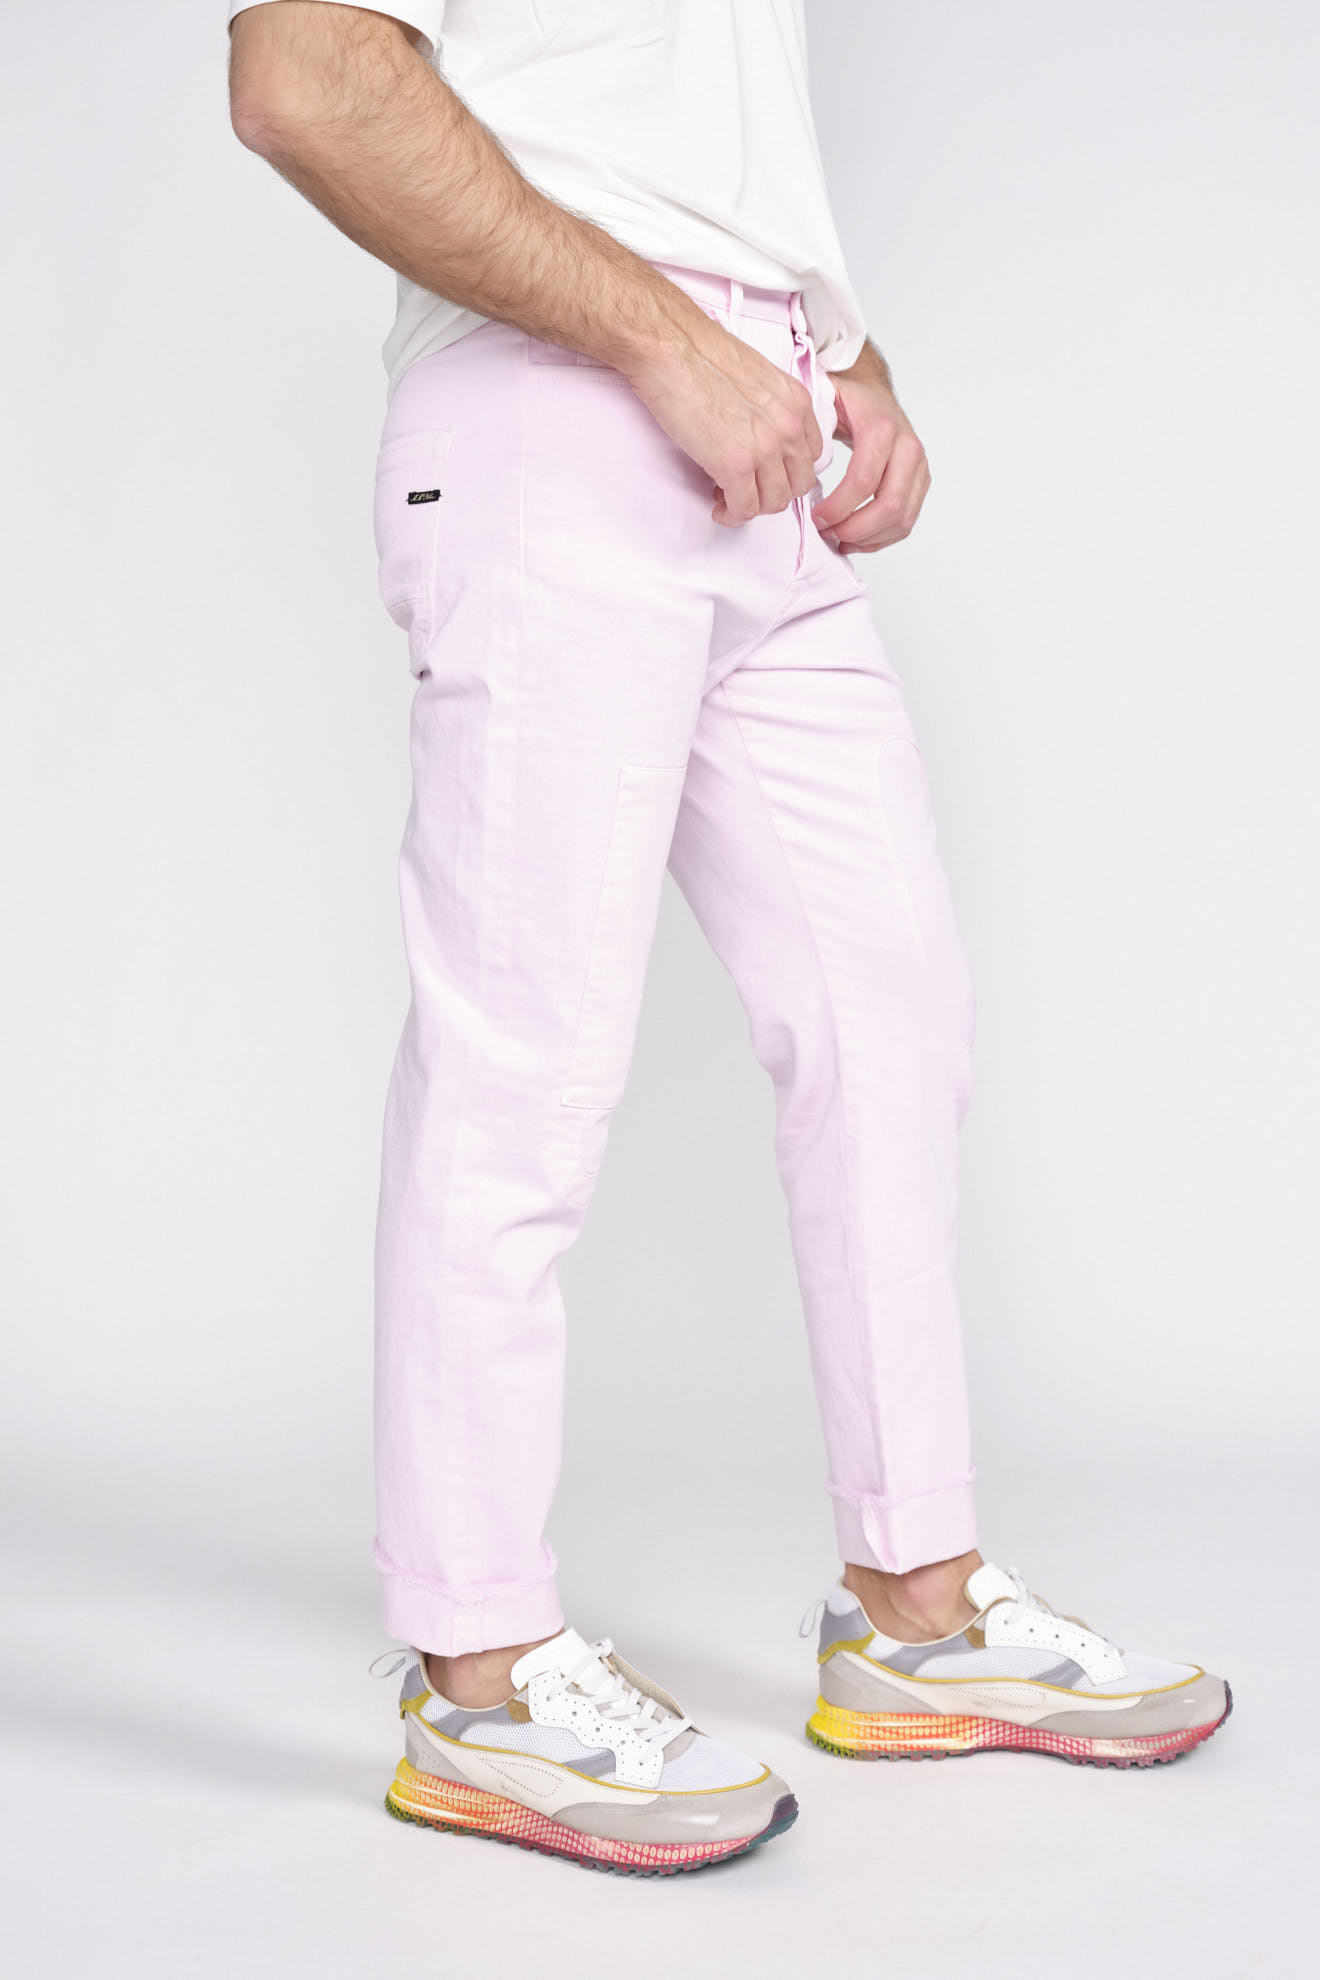 maurizio massimino Jose - denim jeans with patch patches rosa 52